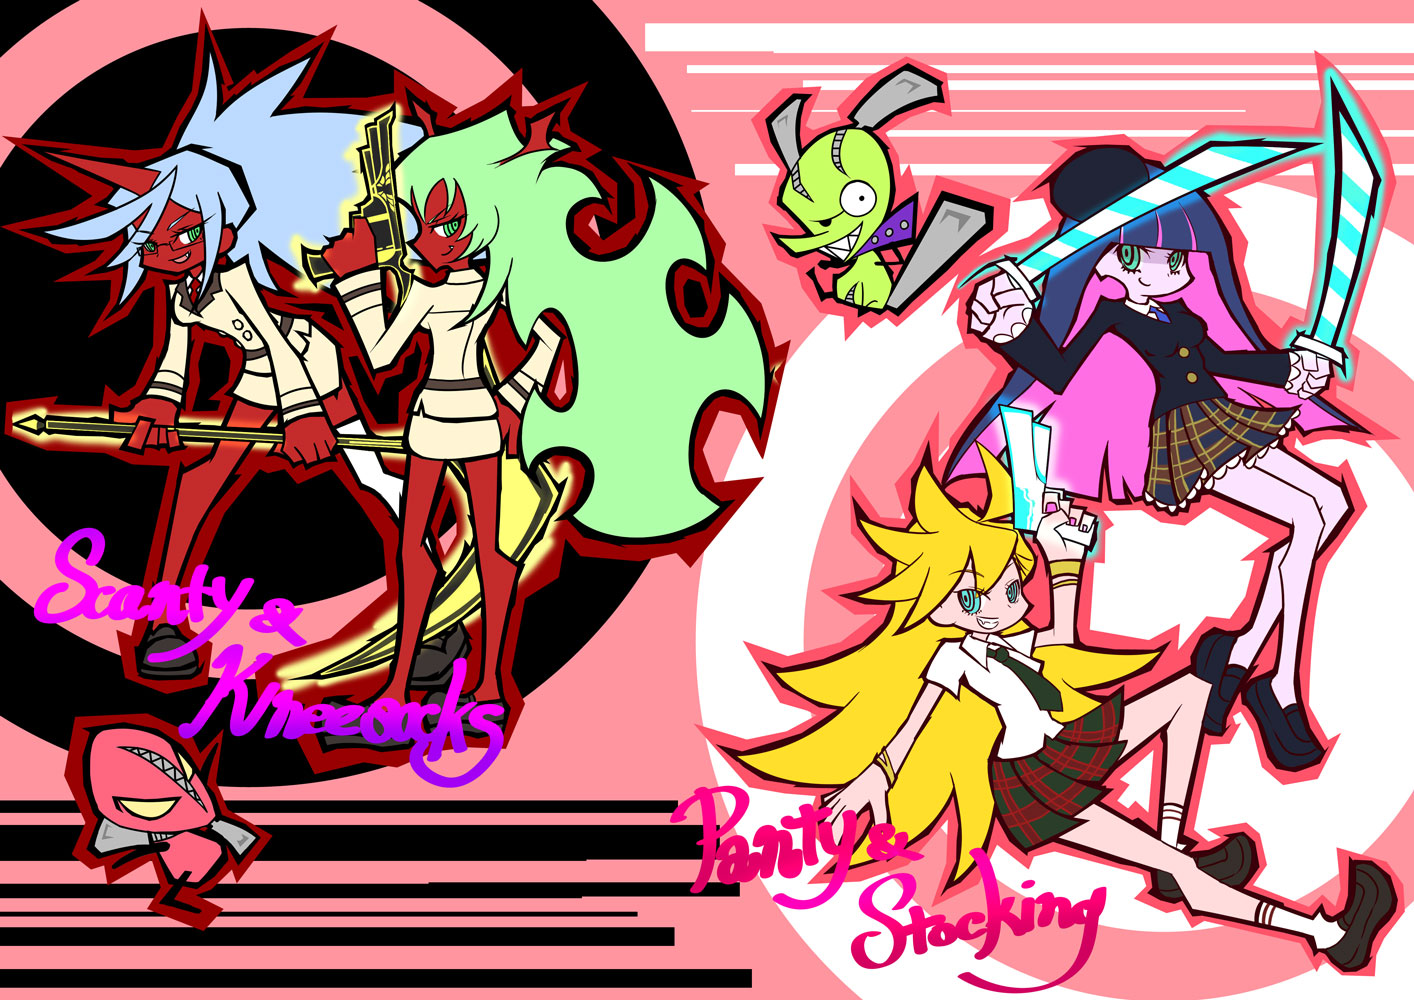 And Stocking With Garterbelt Kneesocks Character Scanty HD Wallpaper